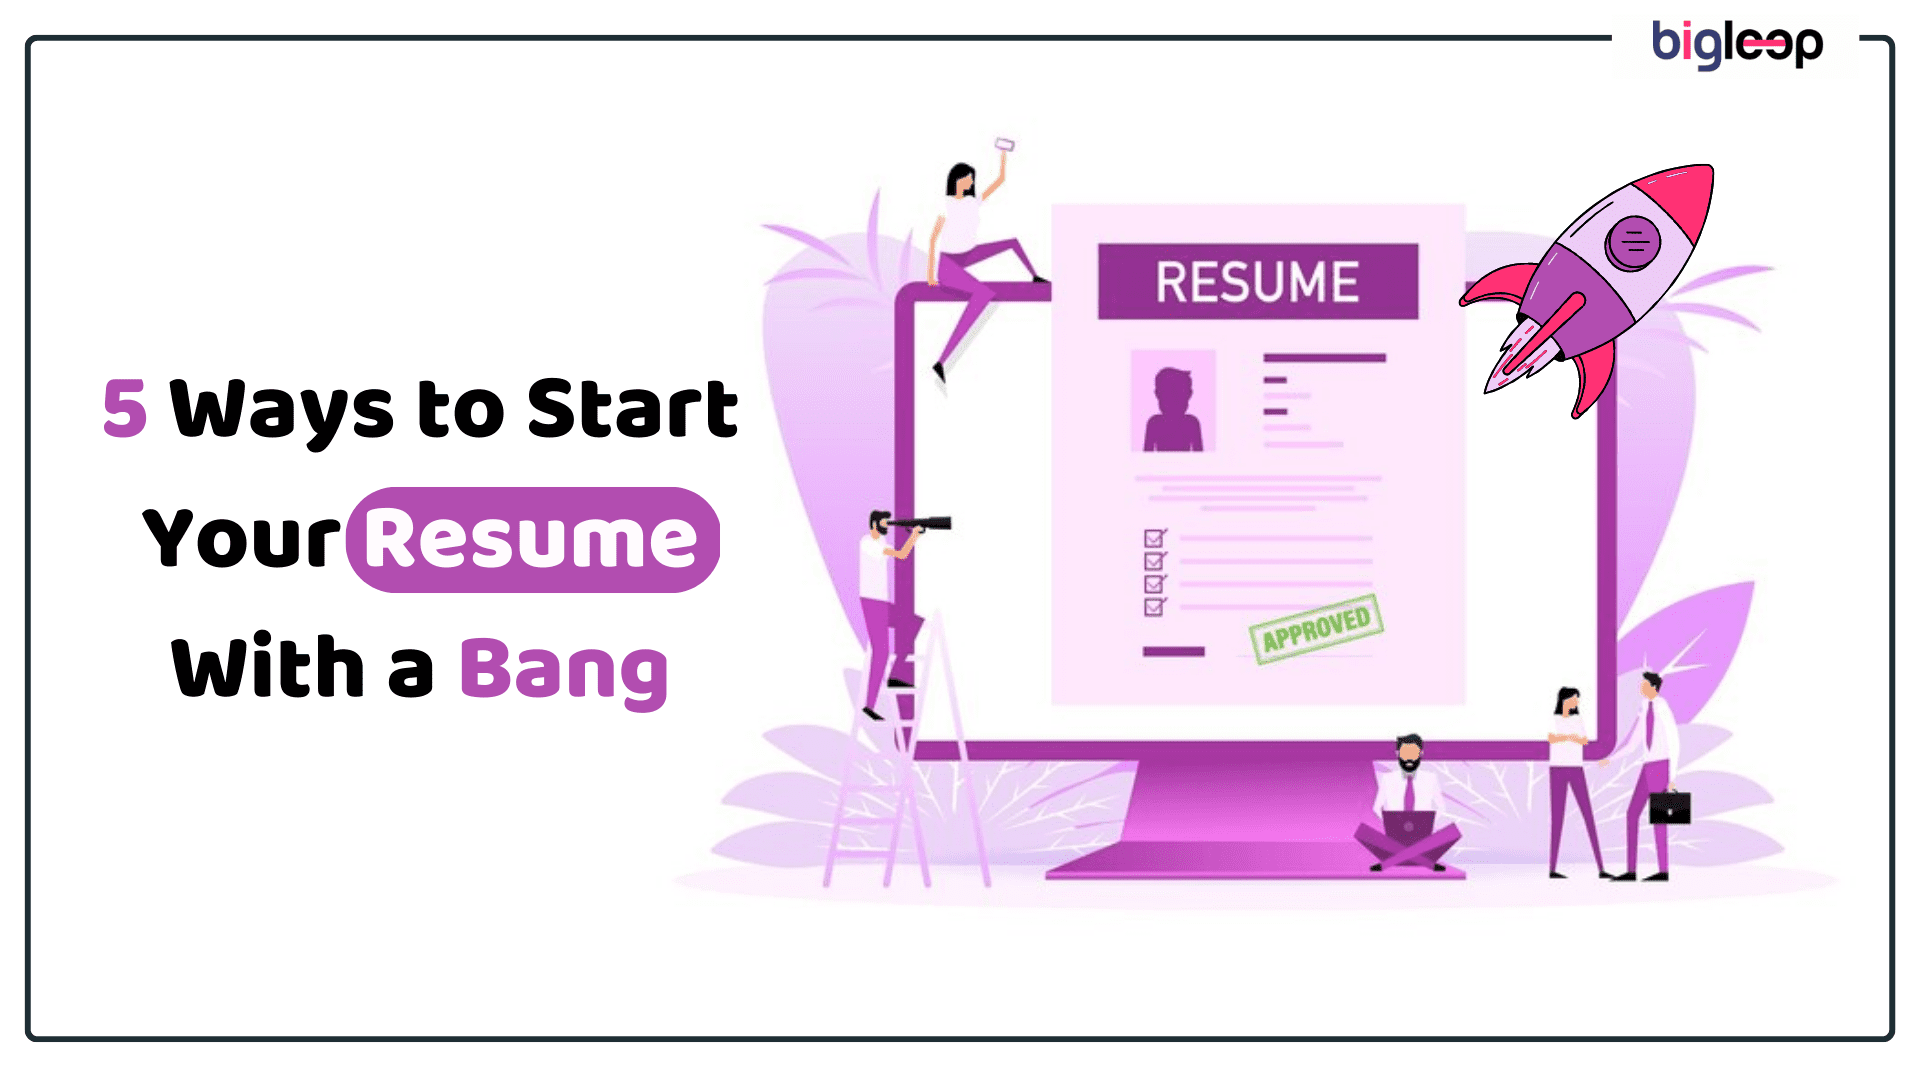 5 Ways to Start Your Resume With a Bang